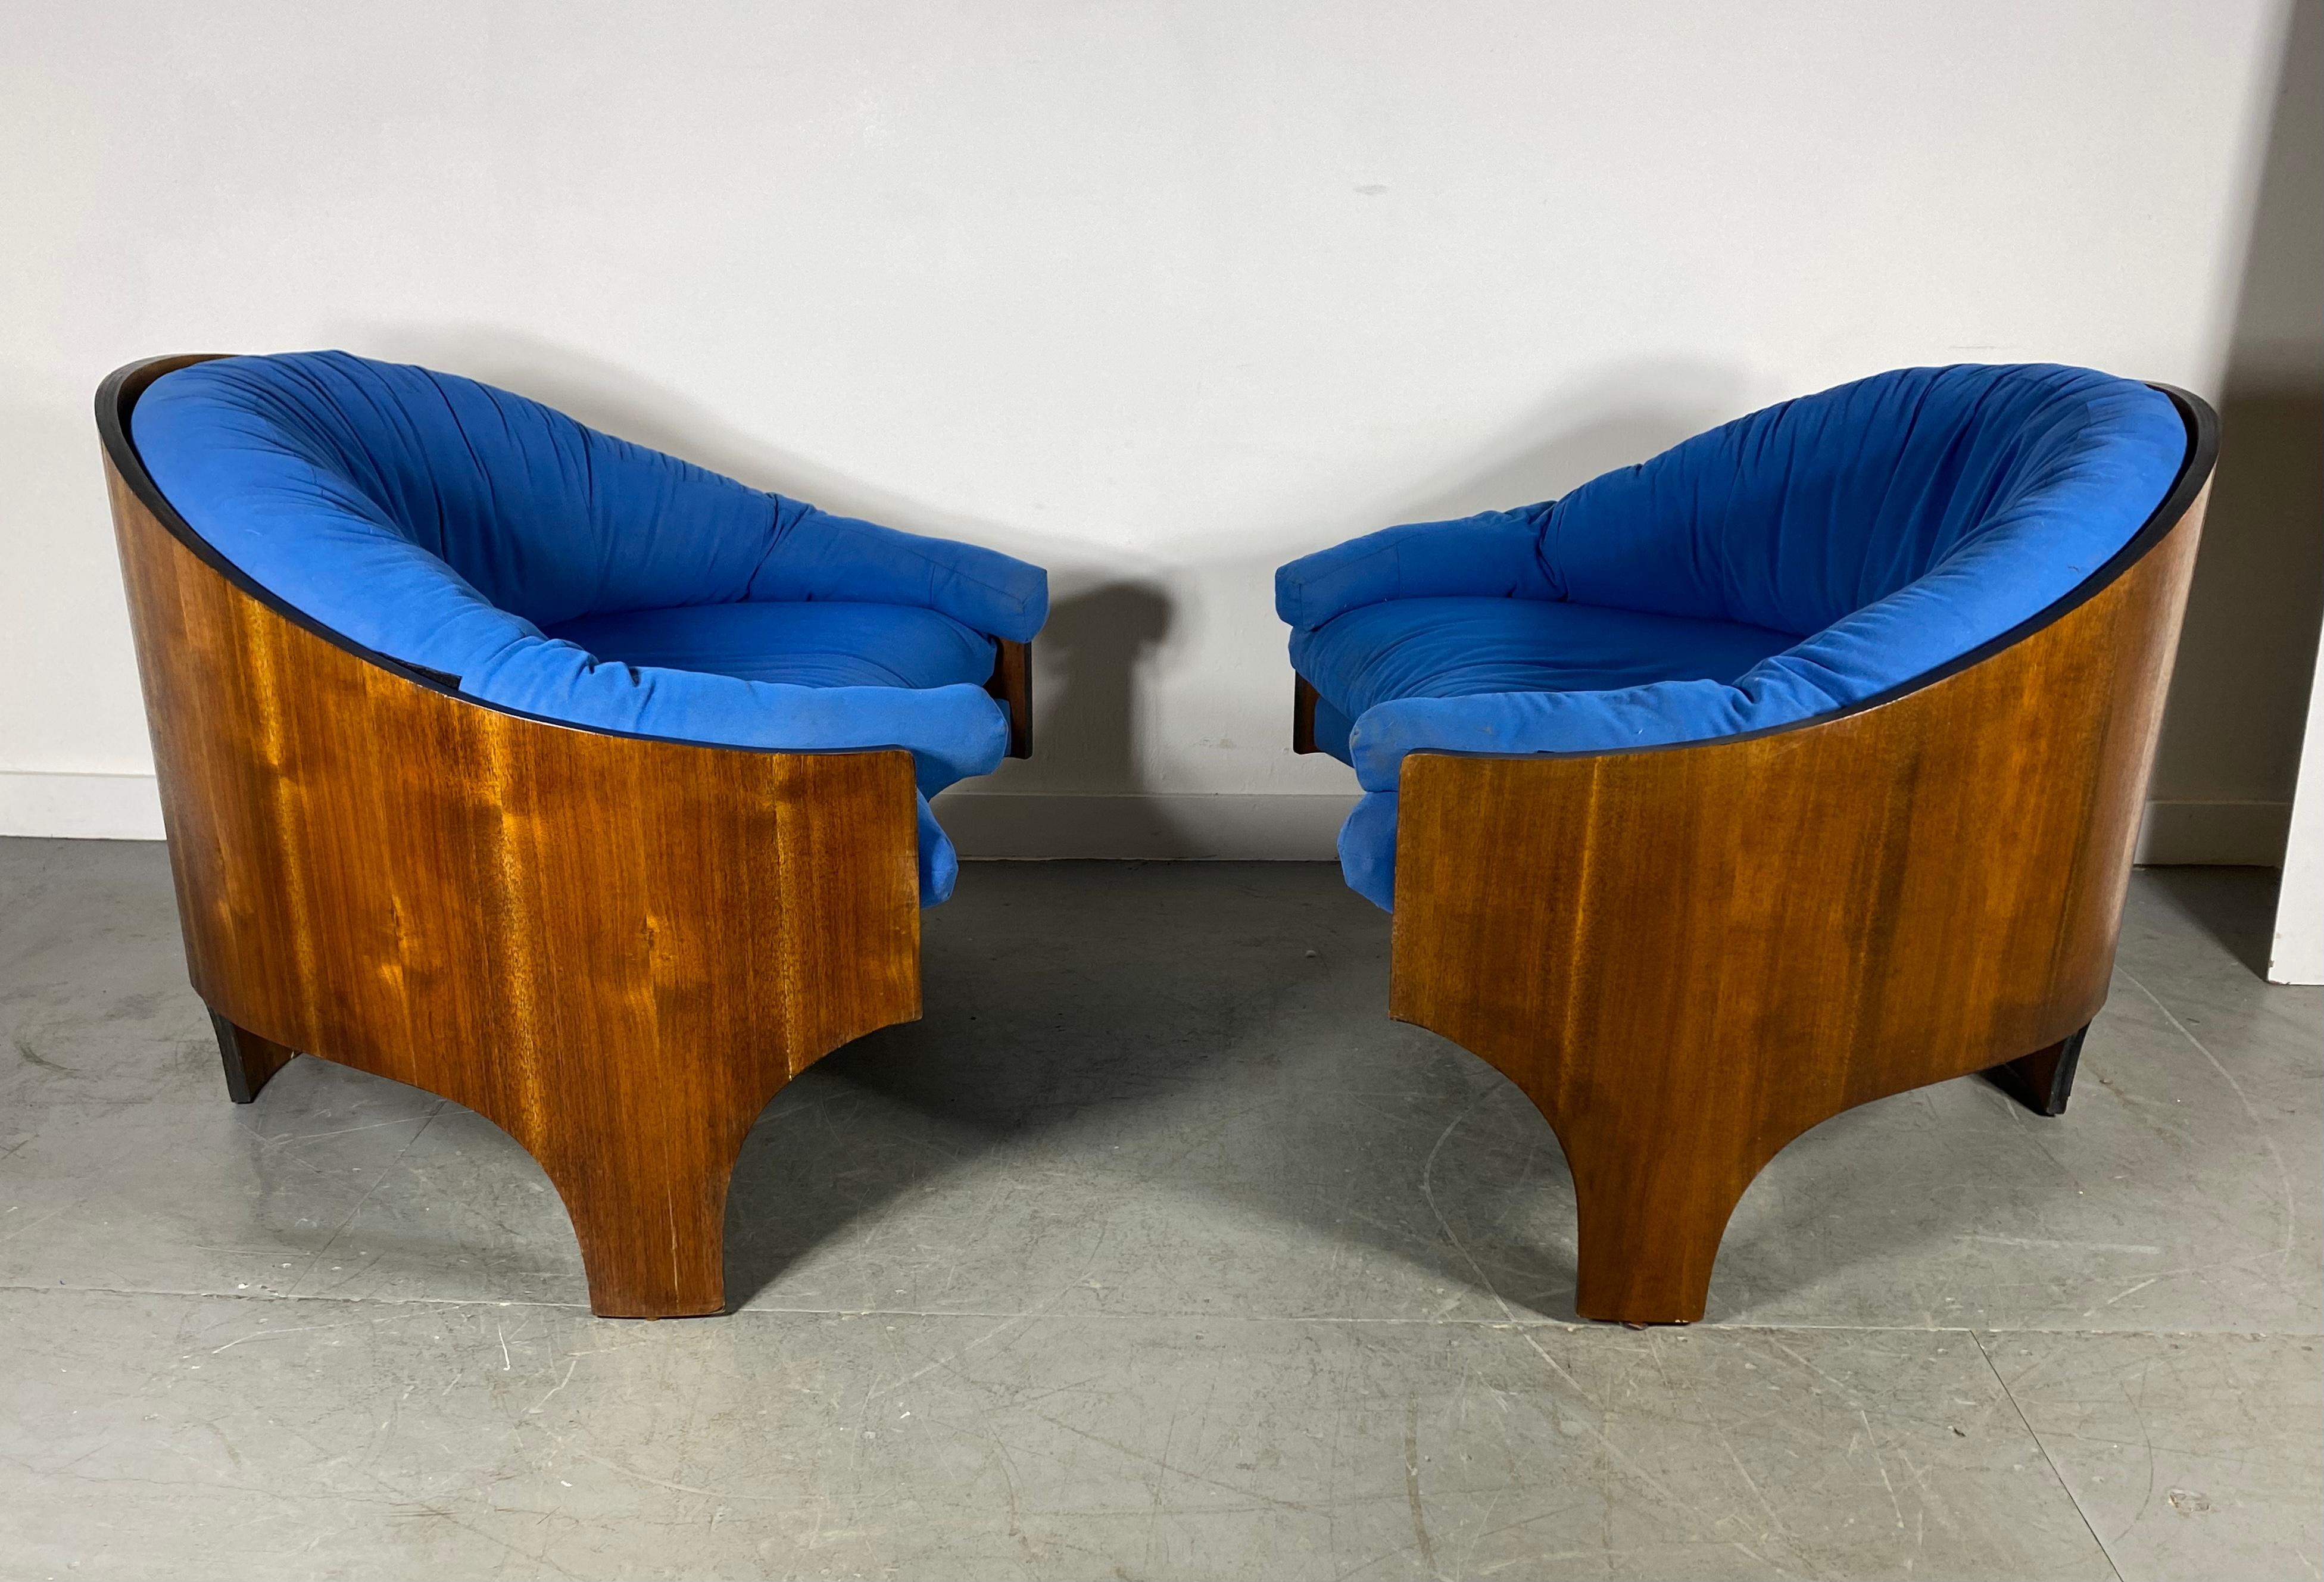 Henry Glass Intimate Island Lounge Chairs Stunning Moulded Walnut For Sale 5